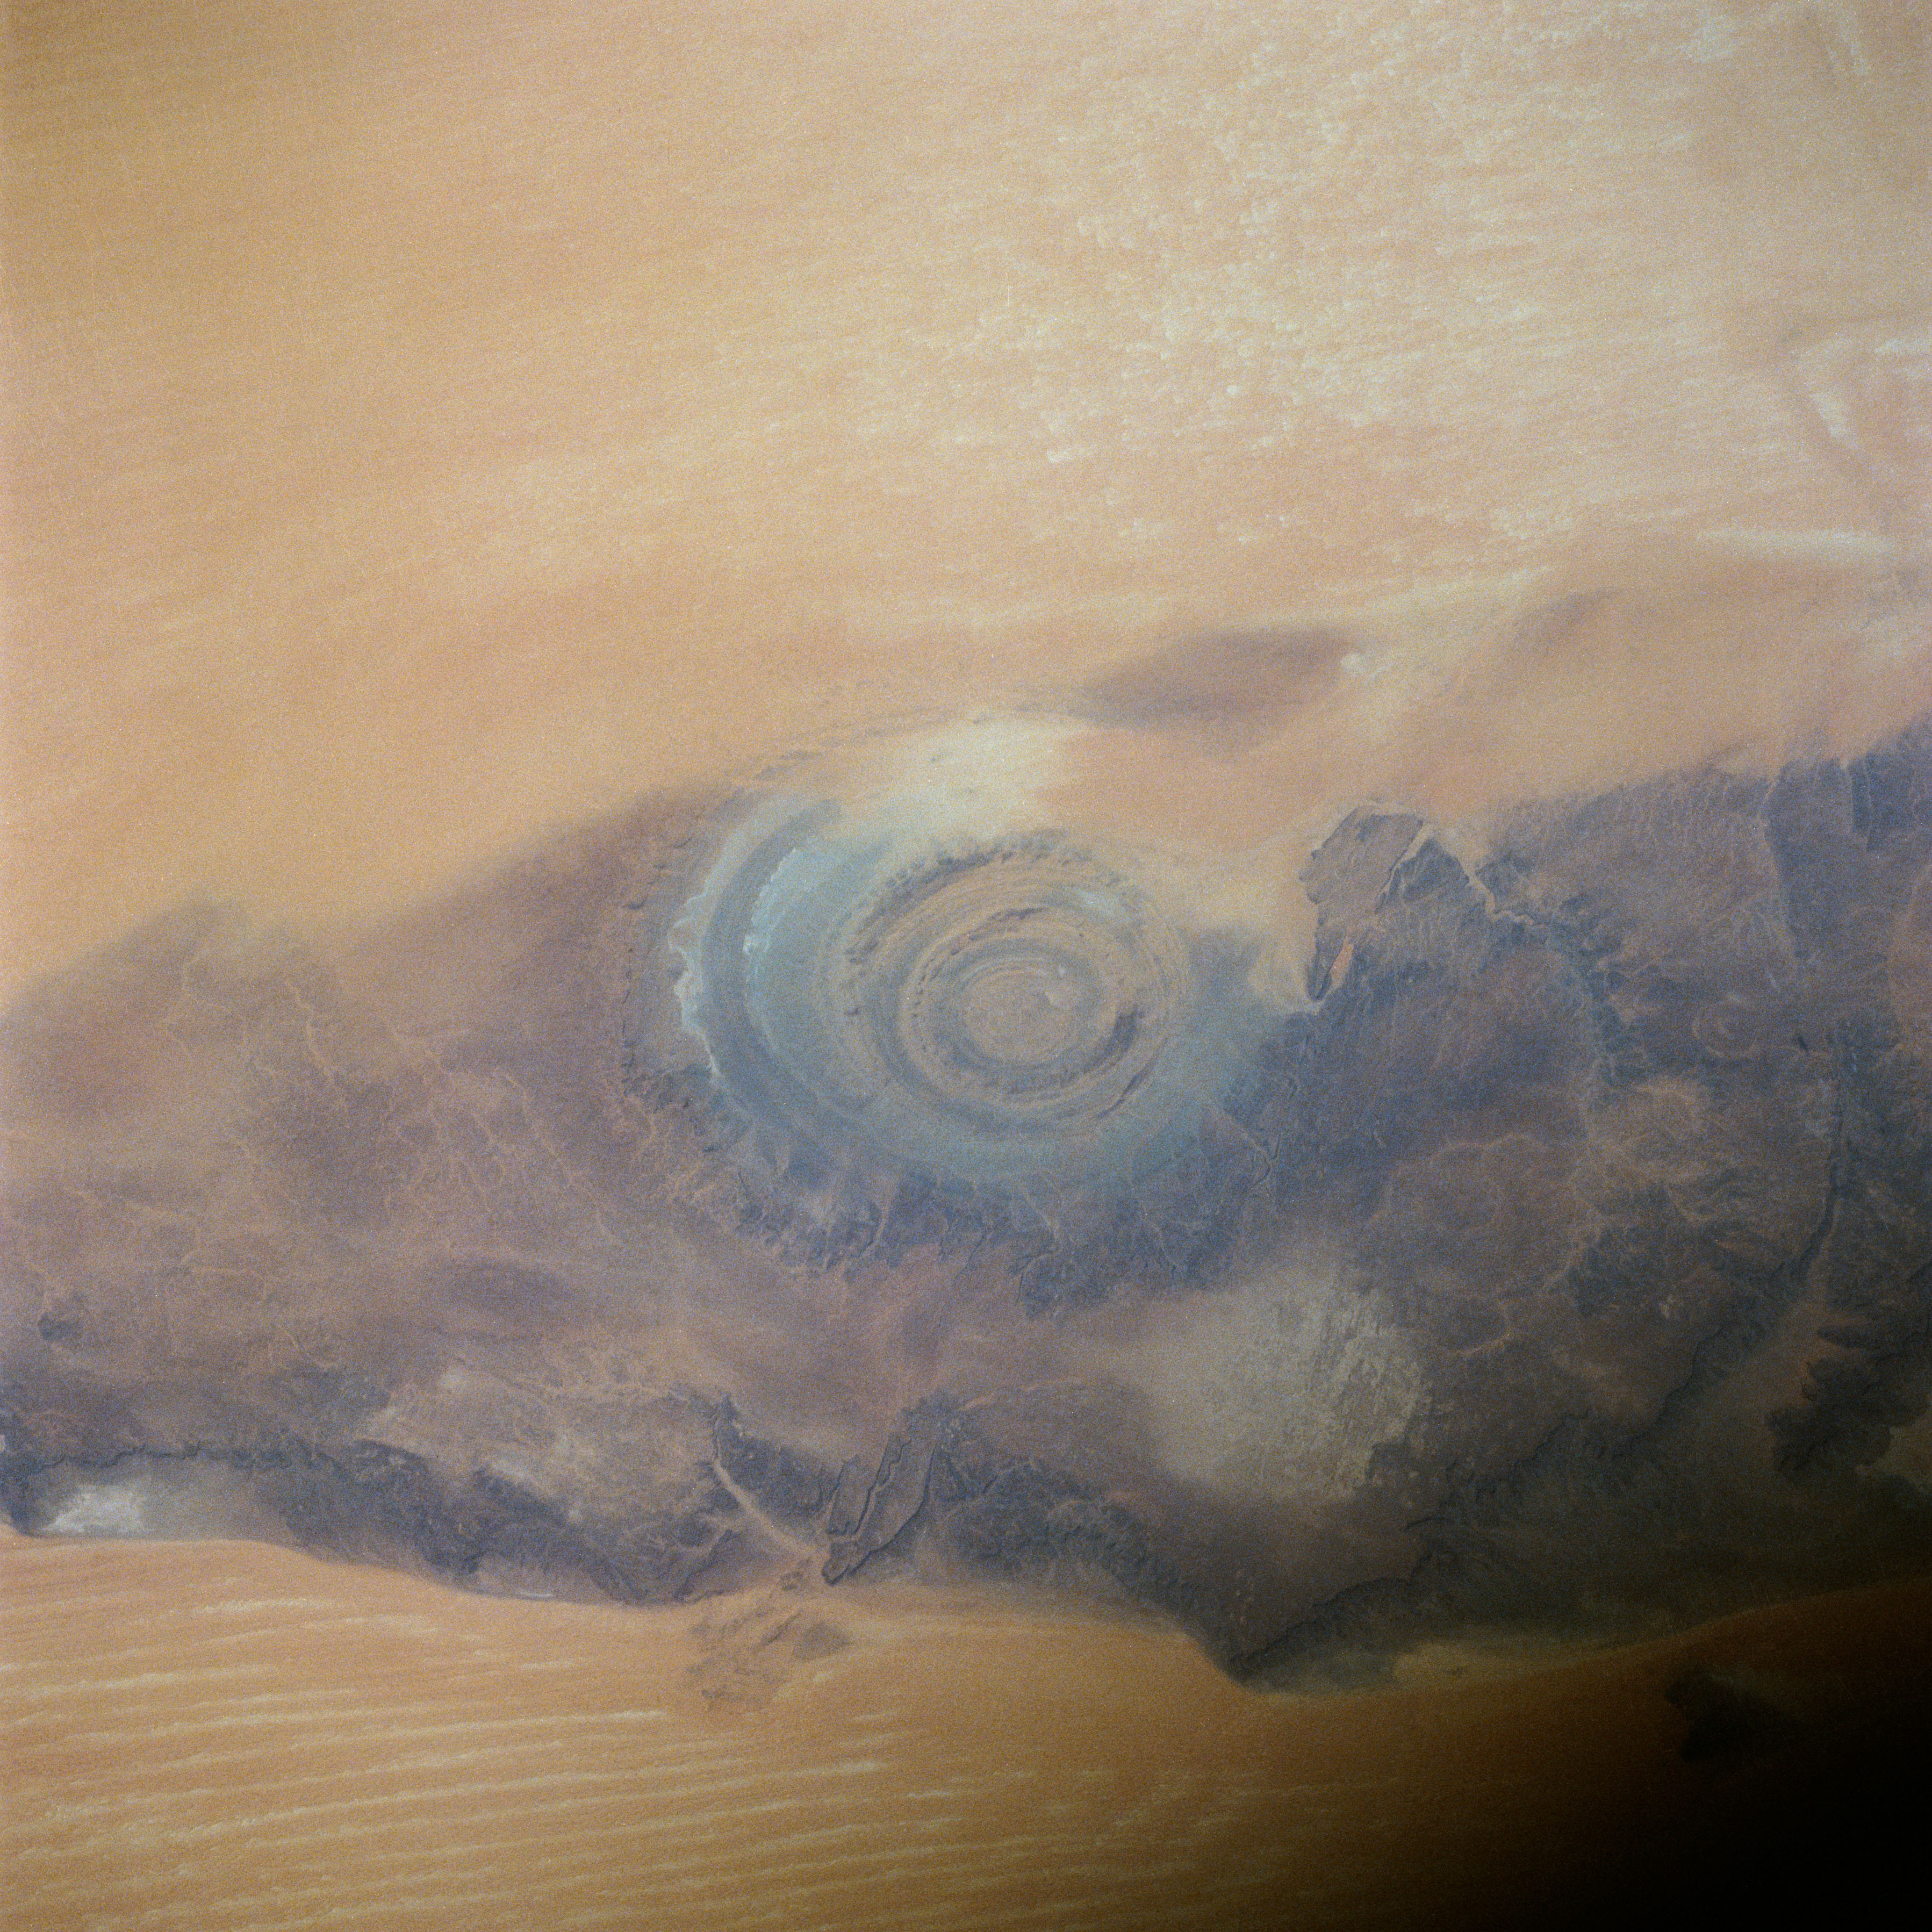 The Richat structure in Mauritania